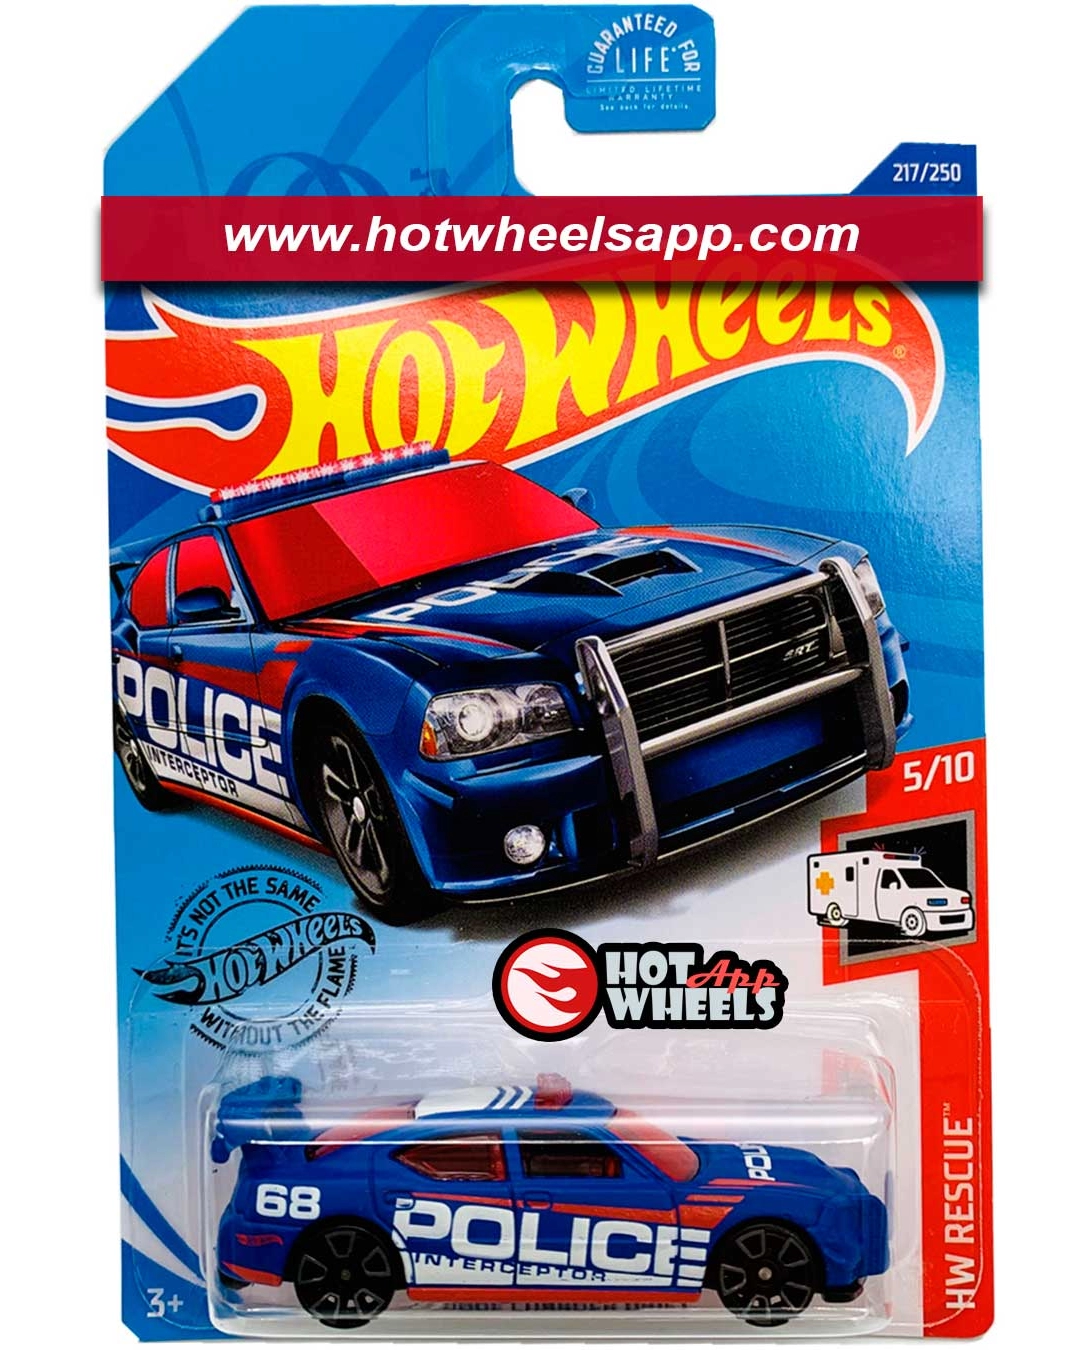 Hot Wheels - HW Rescue 5/10-217/250 POLICE 2020 DODGE CHARGER DRIFT 